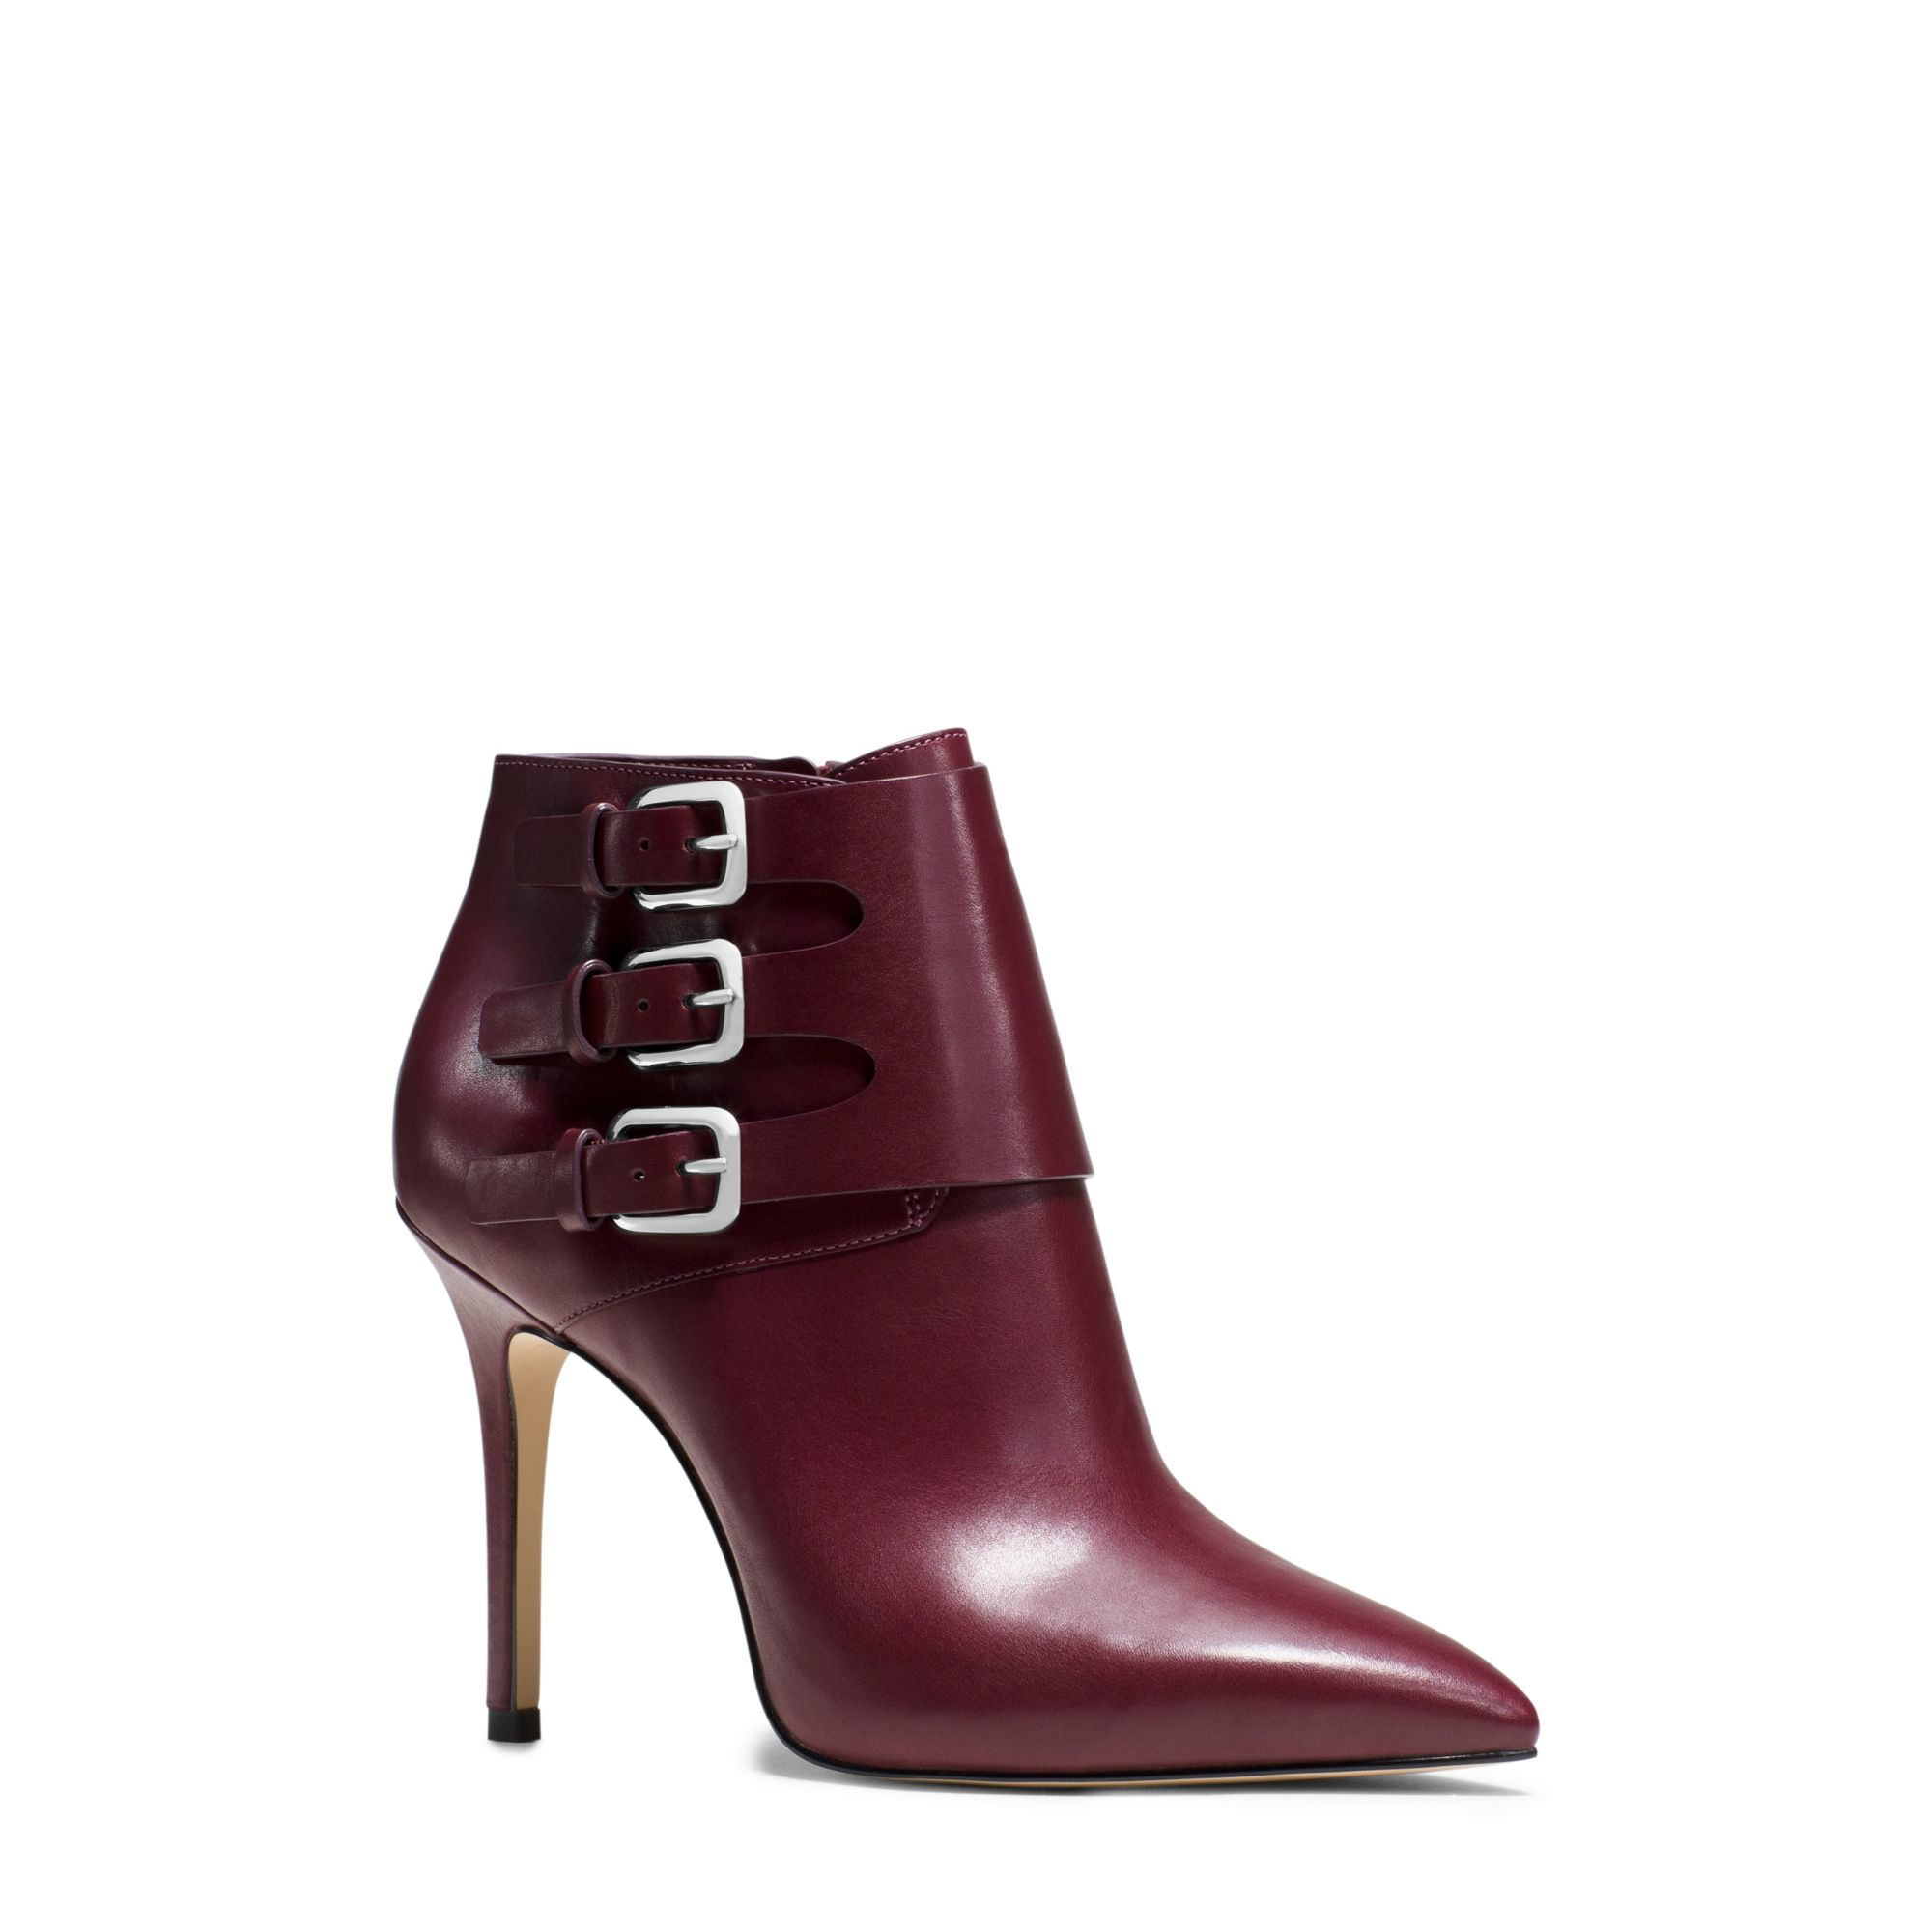 Michael kors Prudence Leather Ankle Boot in Purple (MERLOT) | Lyst